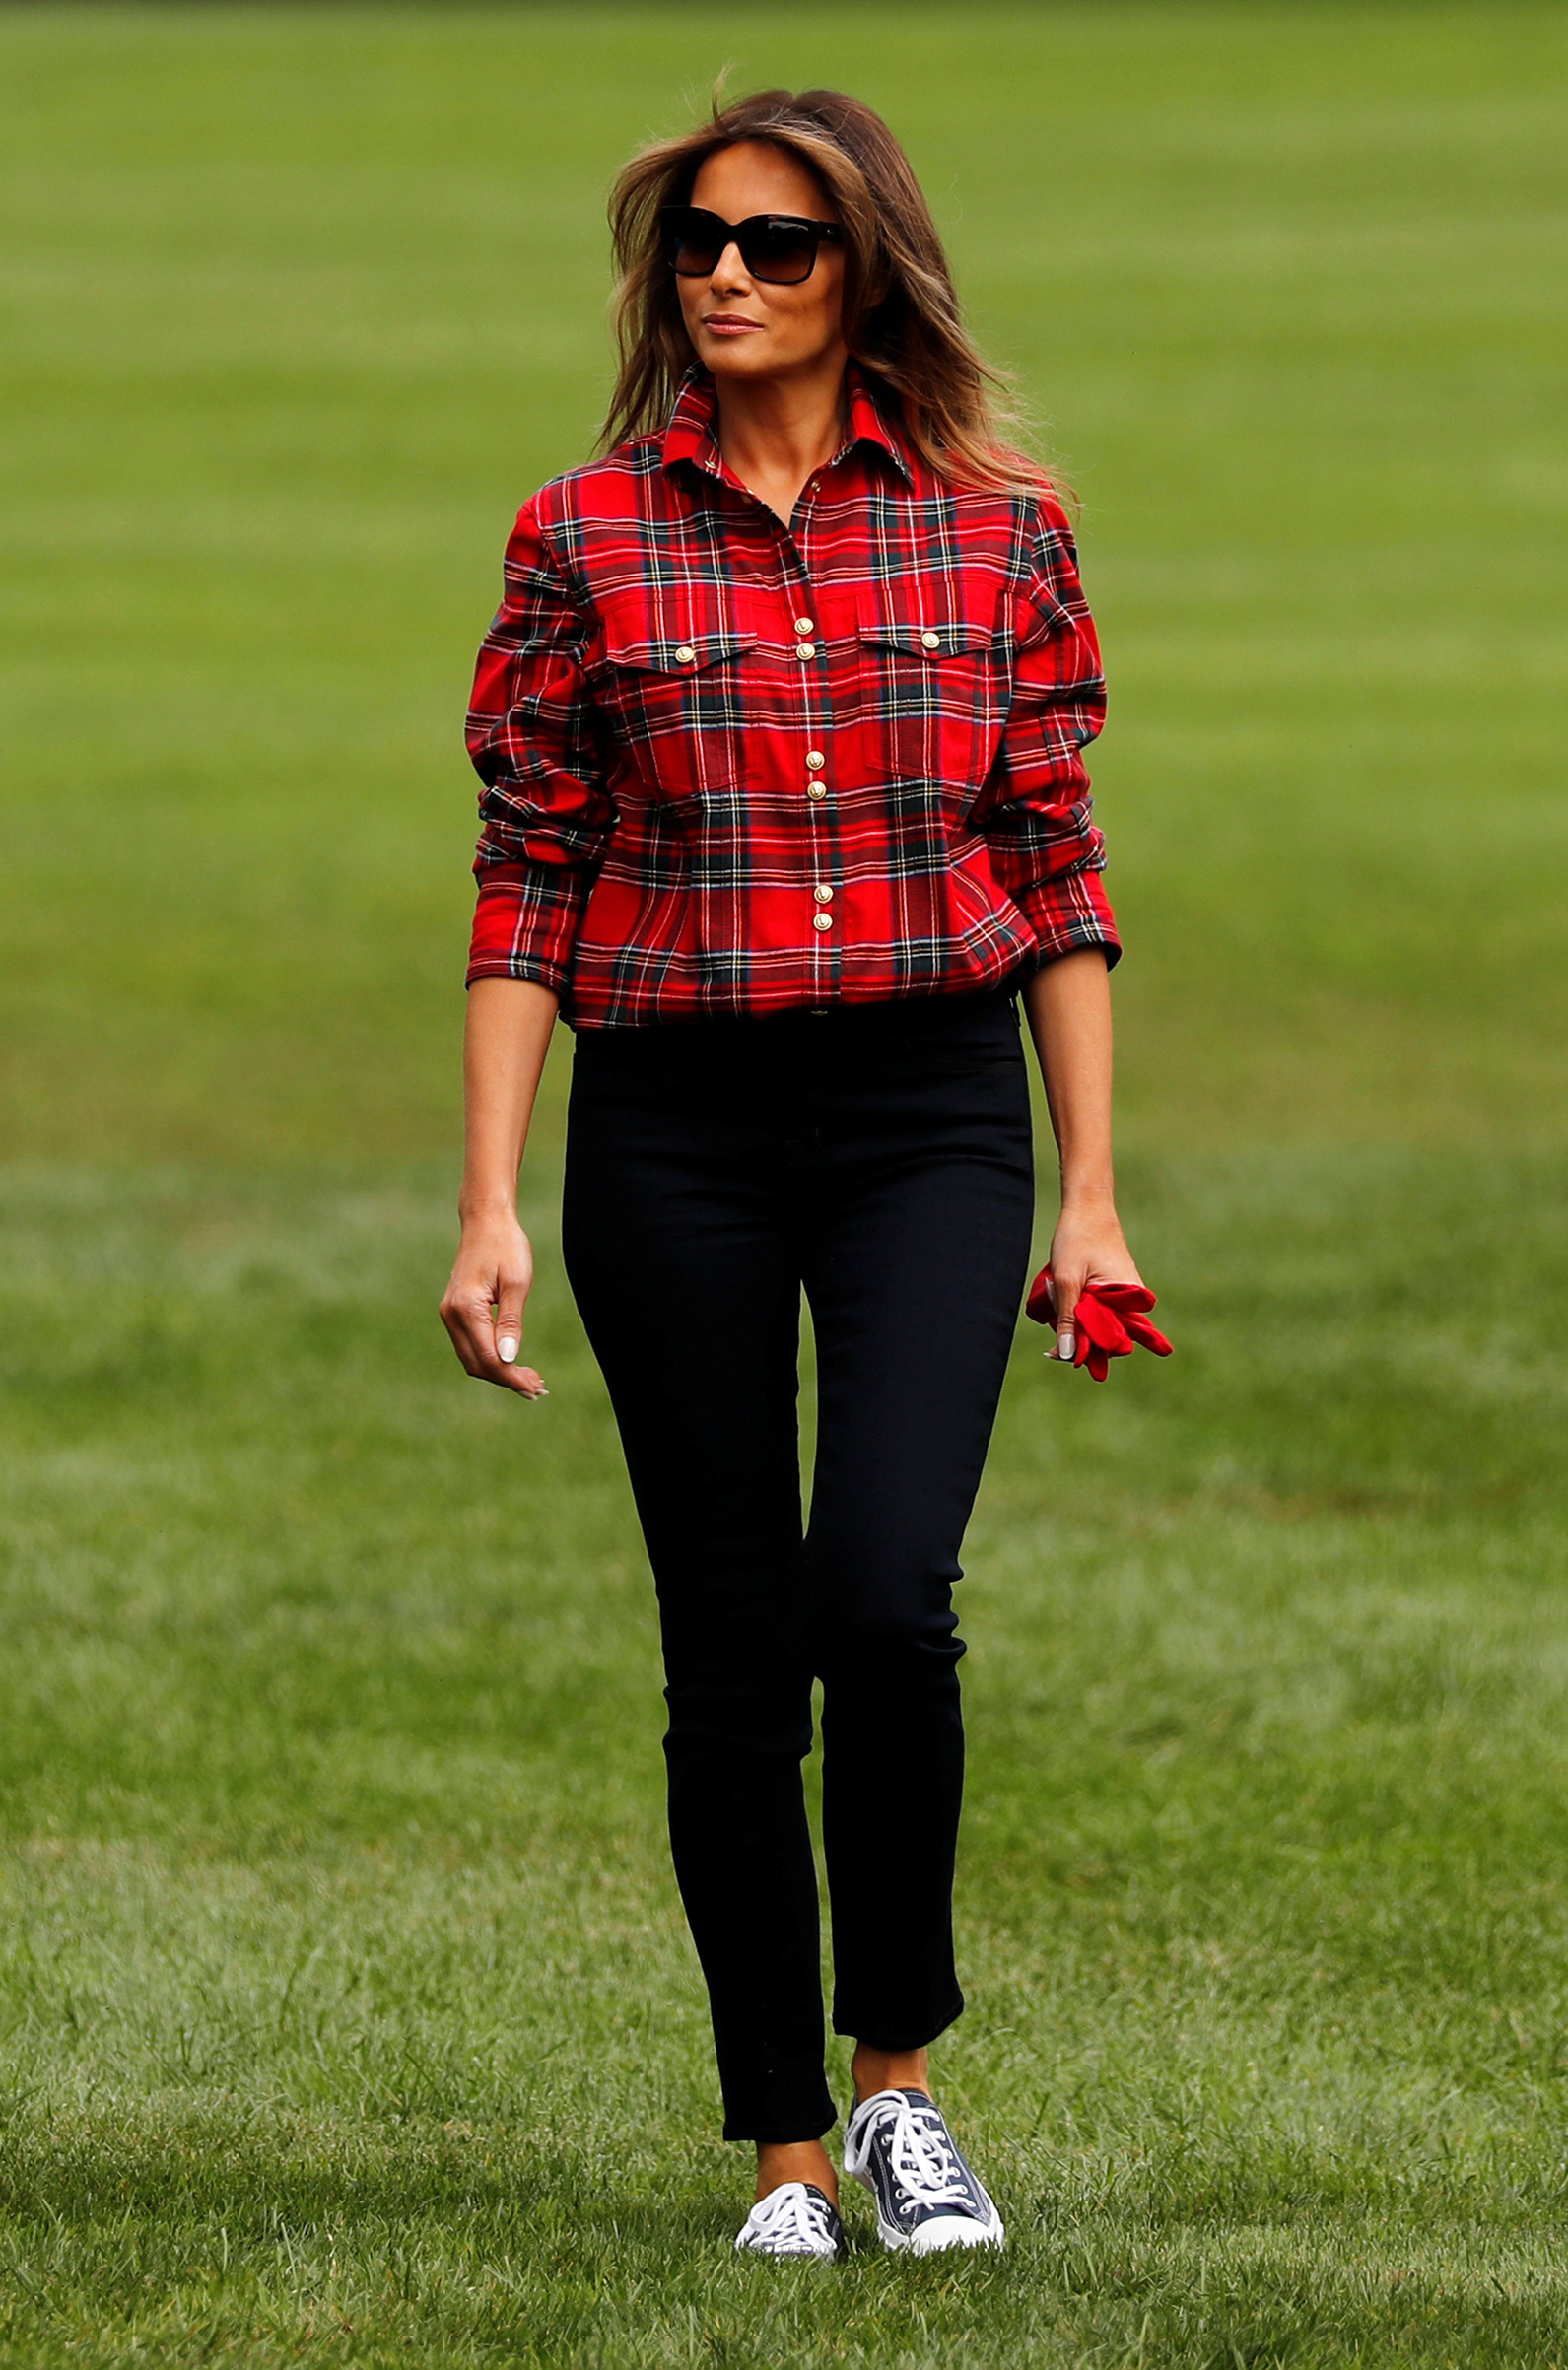 First Lady Melania Trump wearing a tartan Balmain shirt and Converse sneakers,  arrives to work in the White House kitchen garden with students from the Boys and Girls Clubs of Greater Washington, D.C. ,Sept. 22, 2017.